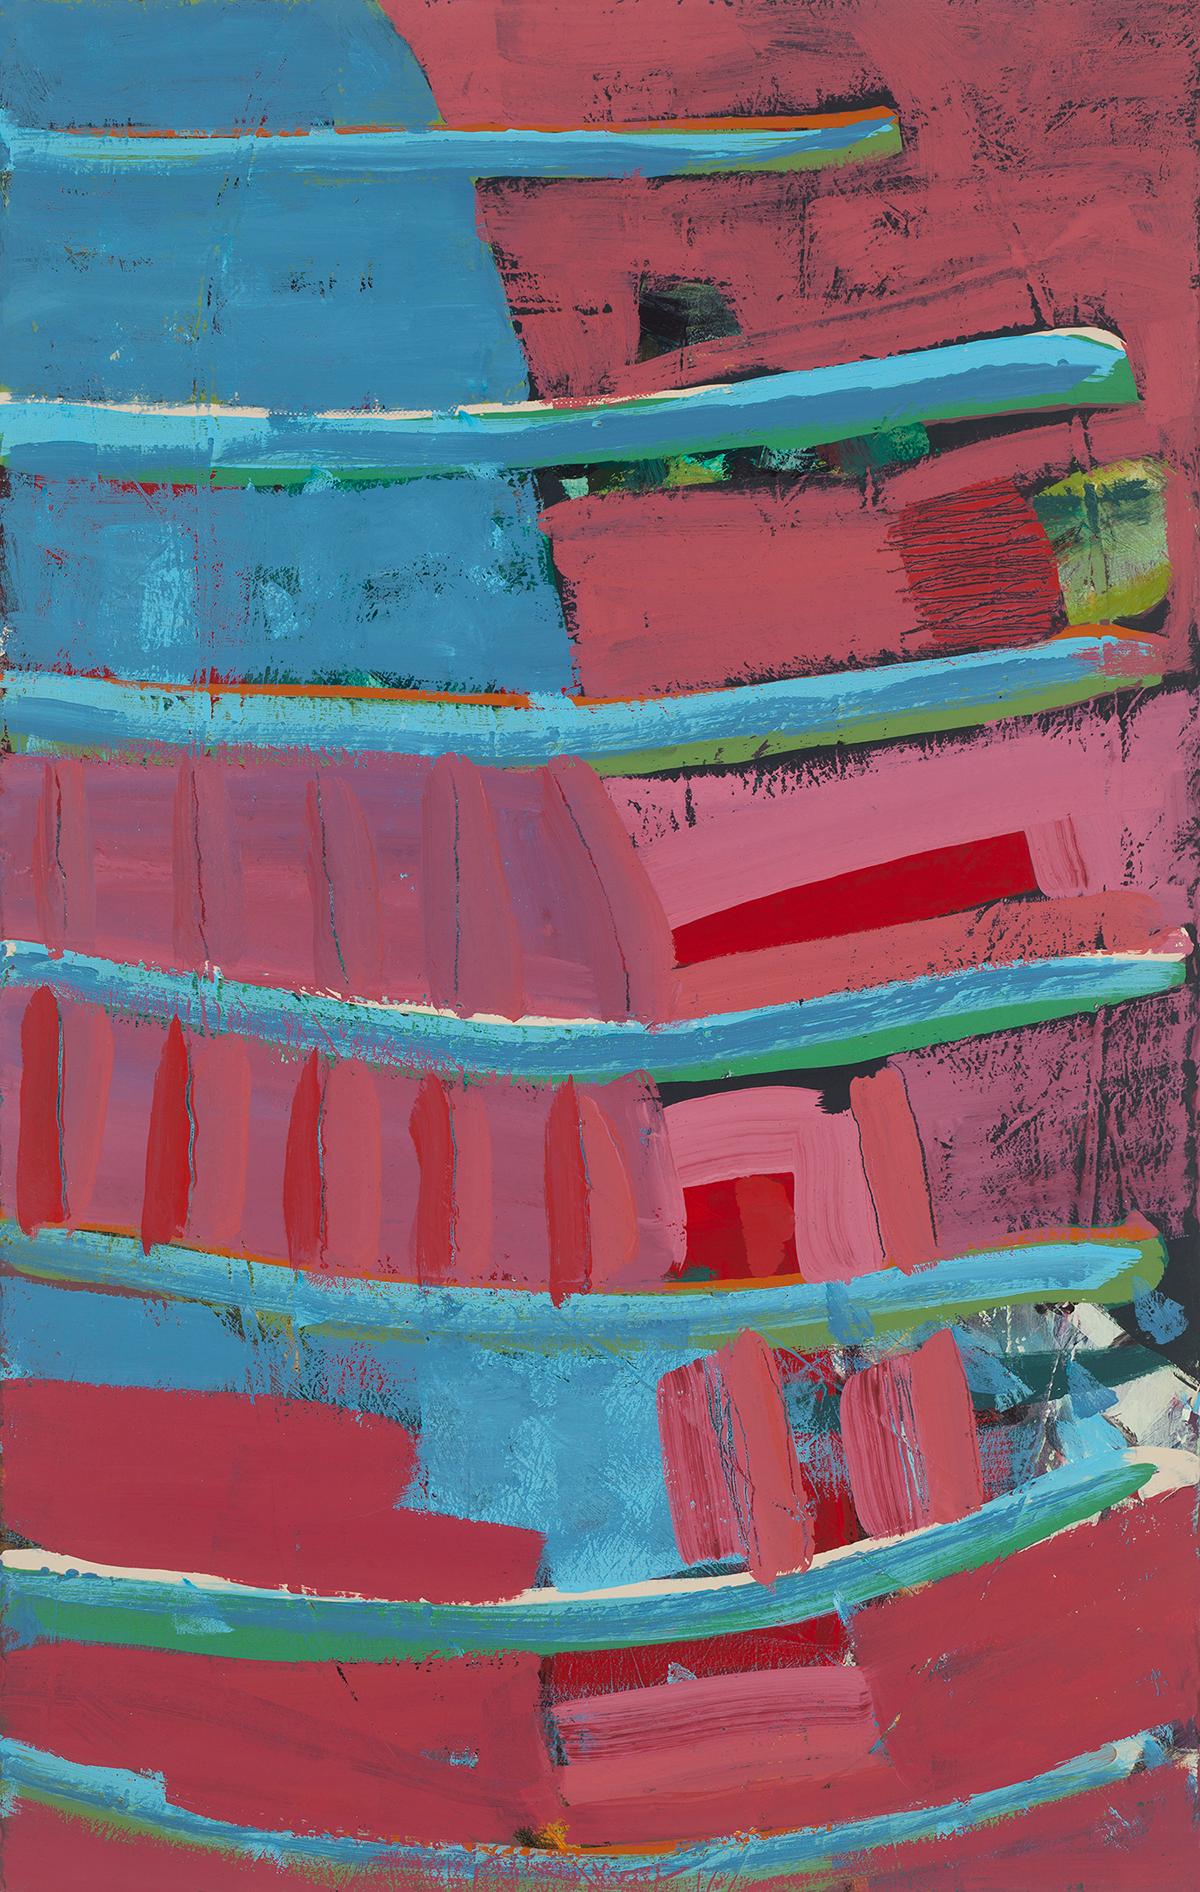 "Easements", abstract, blues, reds, textured, acrylic painting